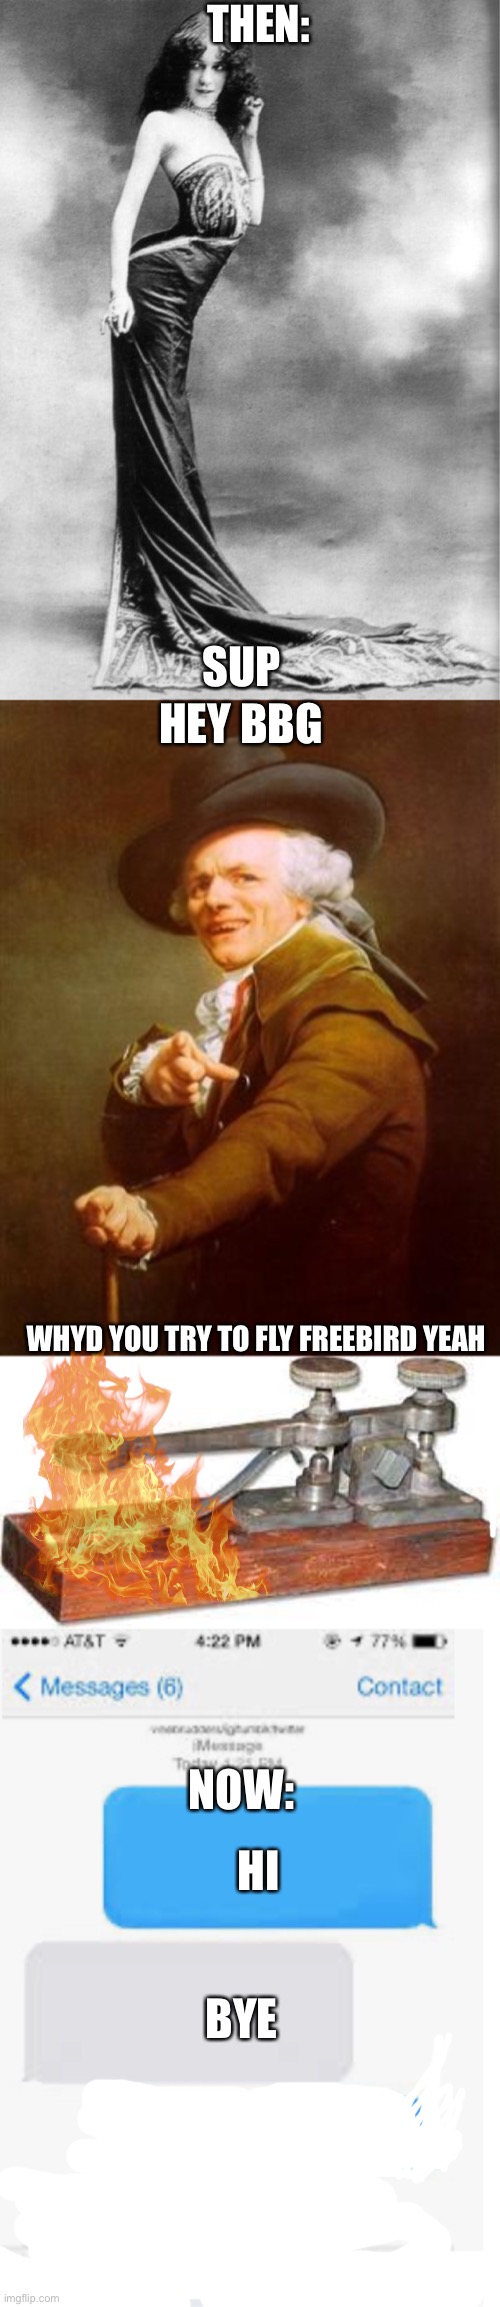 THEN:; SUP; HEY BBG; WHYD YOU TRY TO FLY FREEBIRD YEAH; NOW:; HI; BYE | image tagged in old time woman photo b/w,ye olde englishman,telegraph,blank text conversation | made w/ Imgflip meme maker